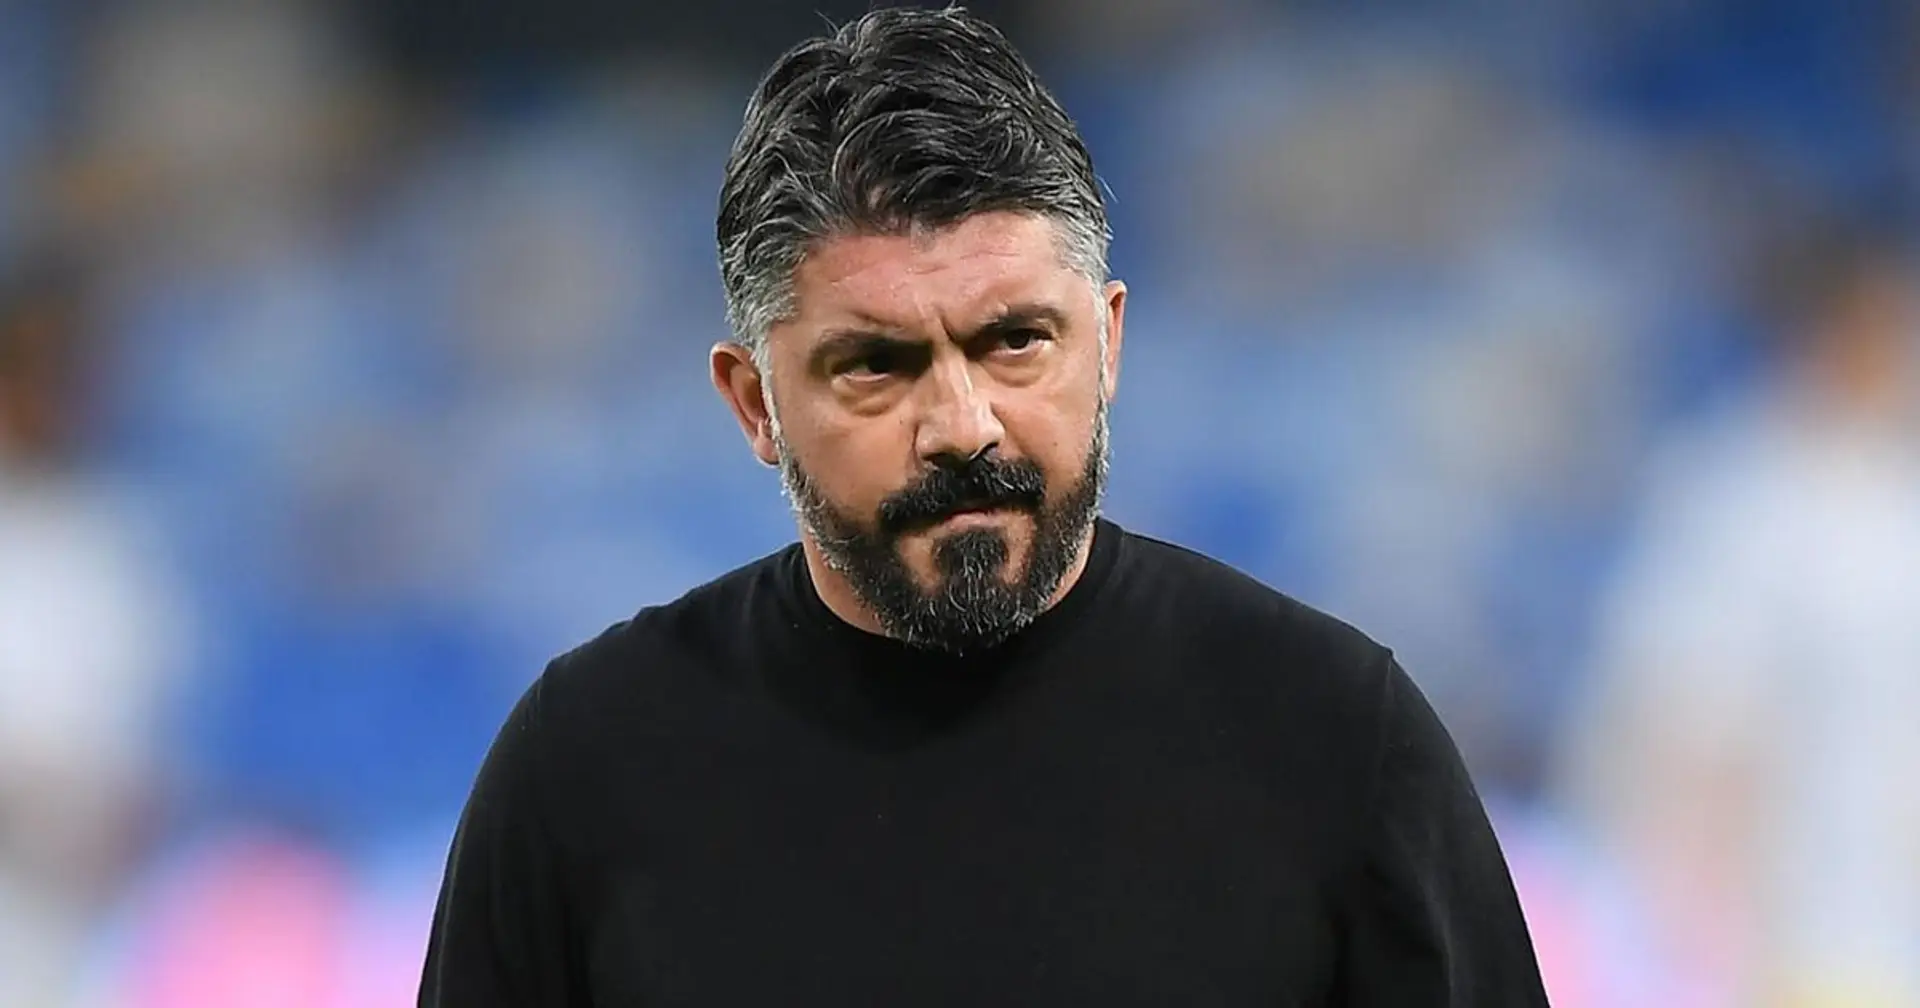 Gennaro Gattuso leaves Fiorentina role 22 days after being appointed as manager